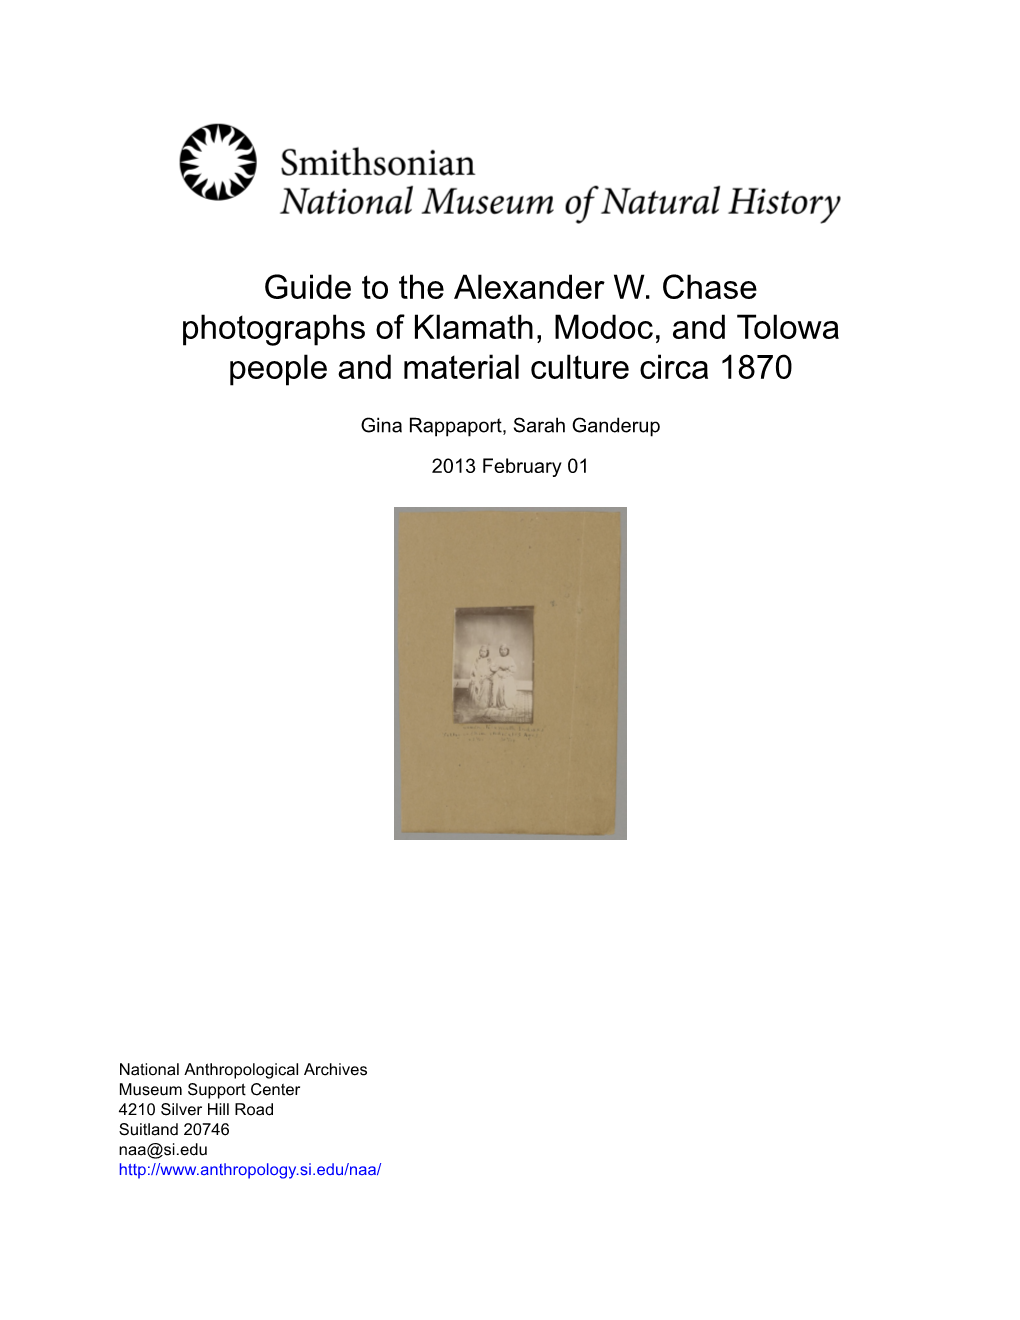 Guide to the Alexander W. Chase Photographs of Klamath, Modoc, and Tolowa People and Material Culture Circa 1870